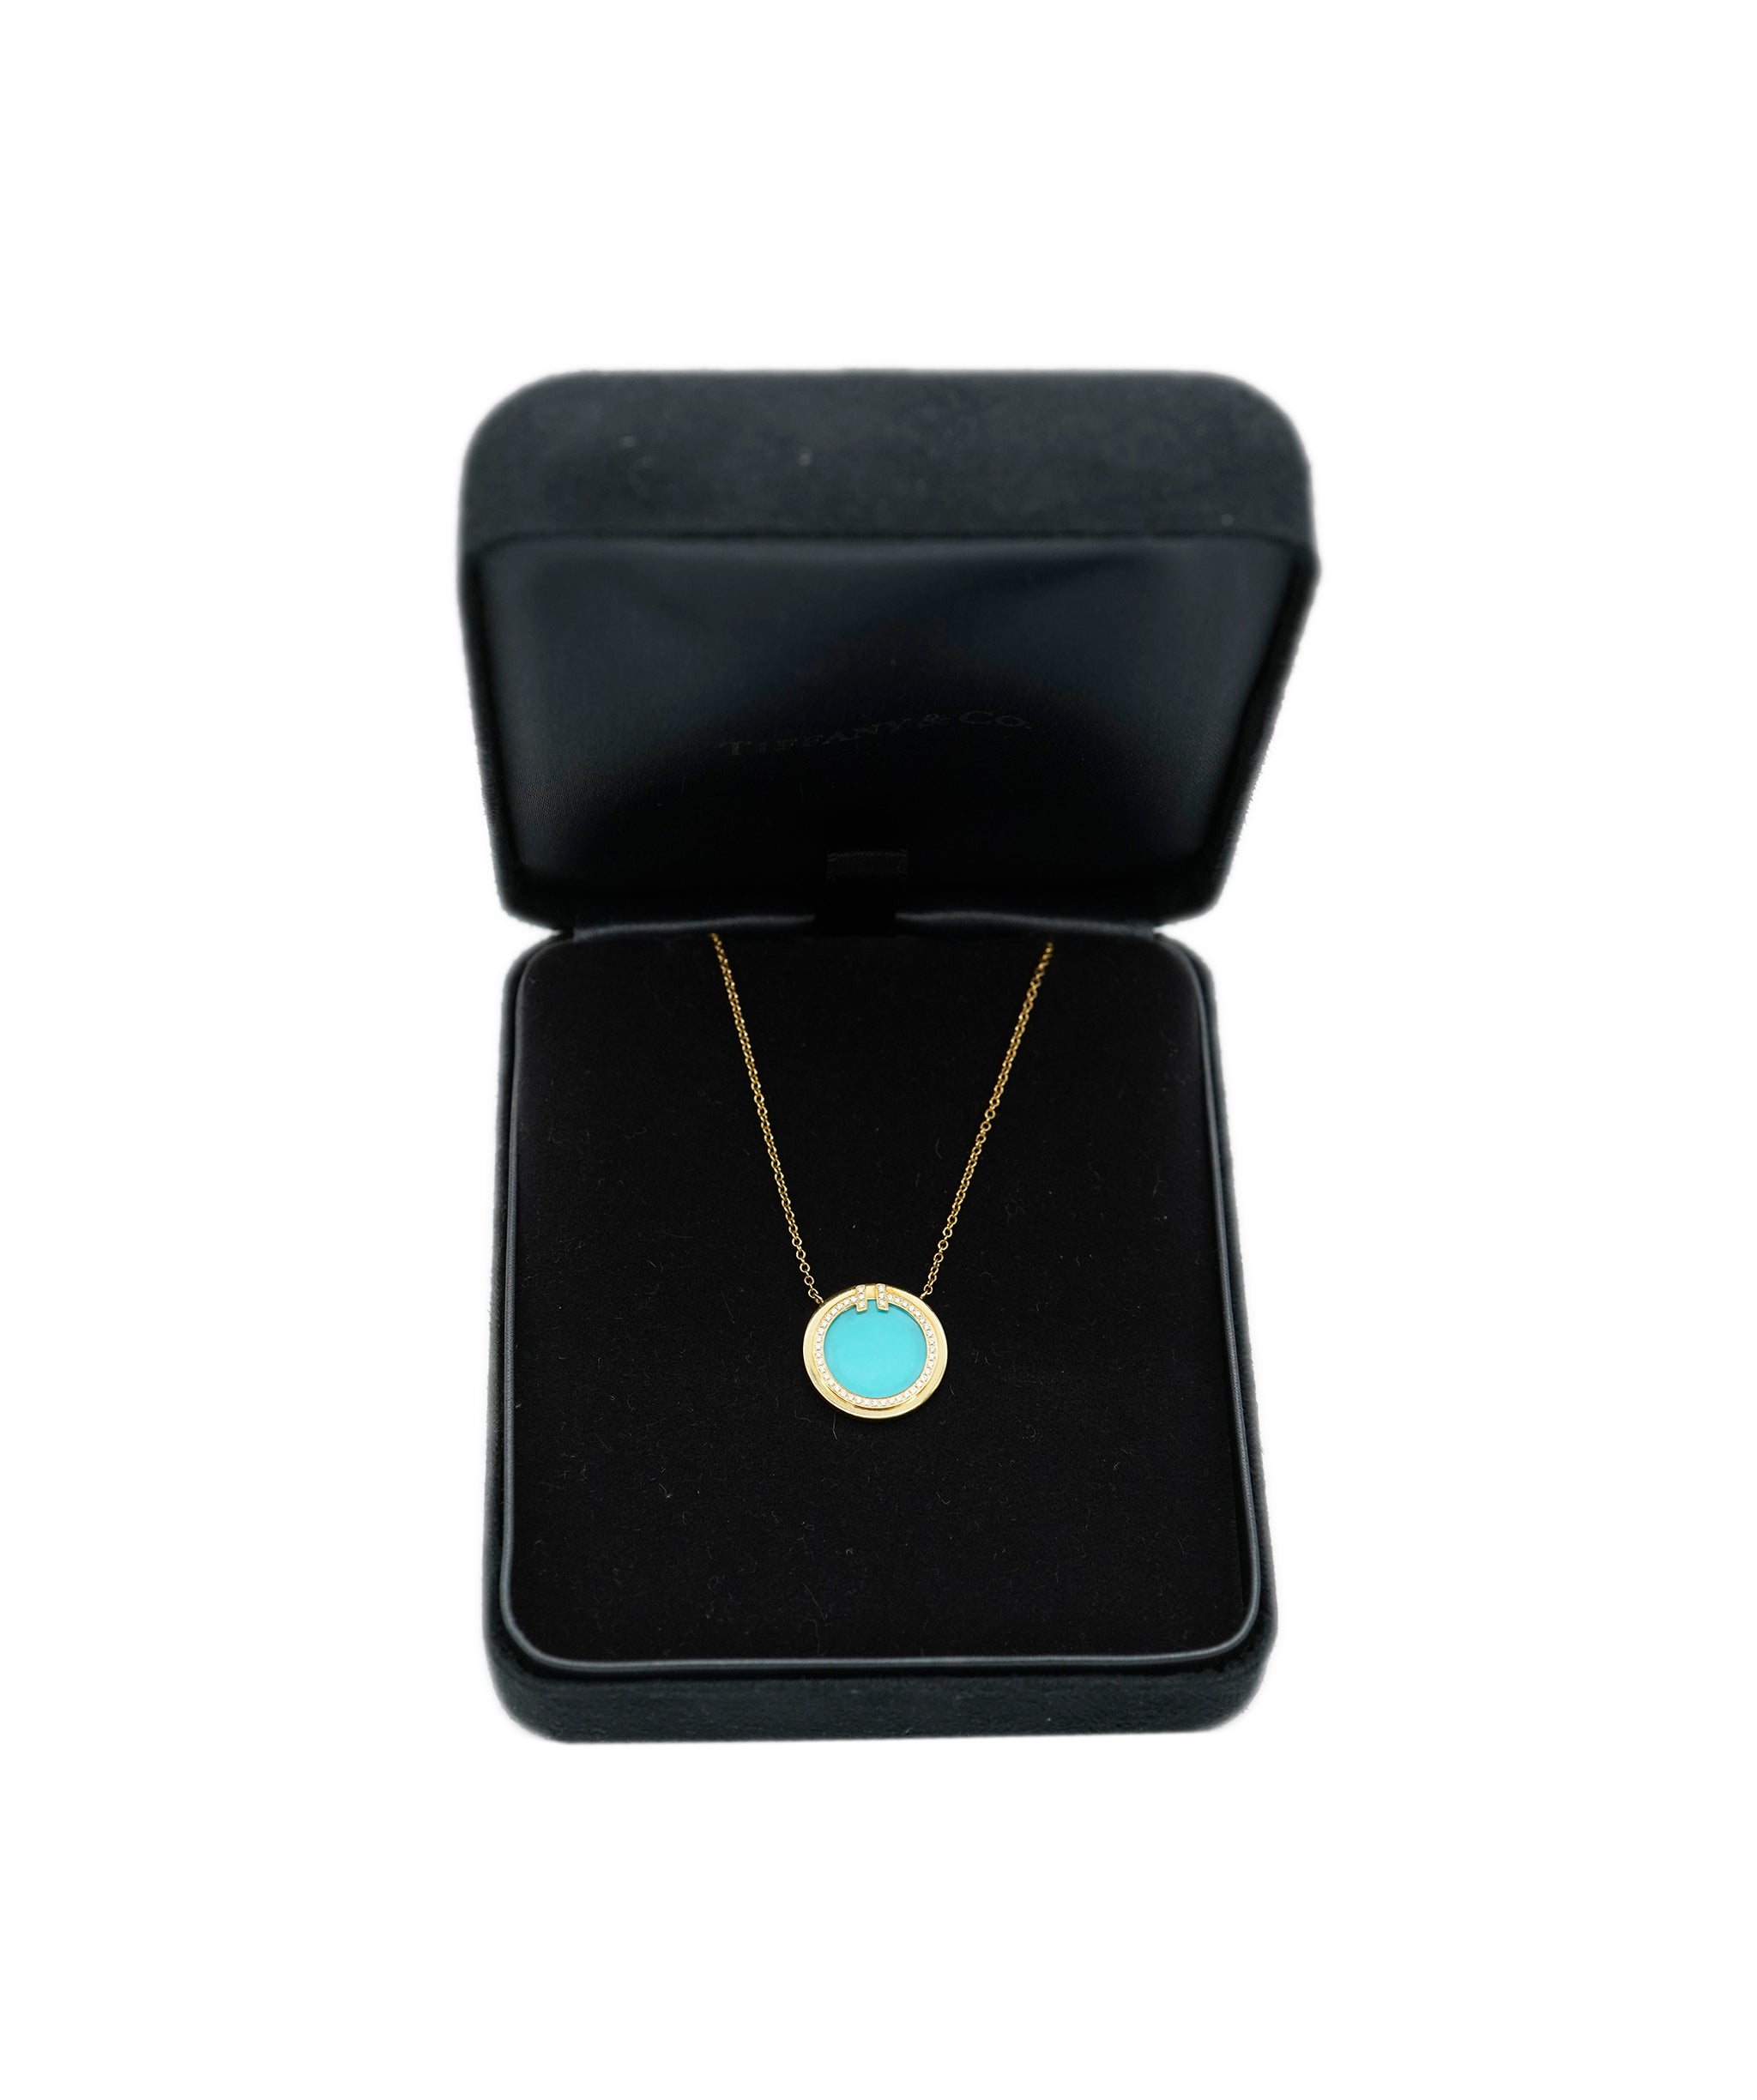 Tiffany & Co. Tiffany & Co. T Diamond, Turquoise and Yellow gold Circle Pendant Necklace AHC1926